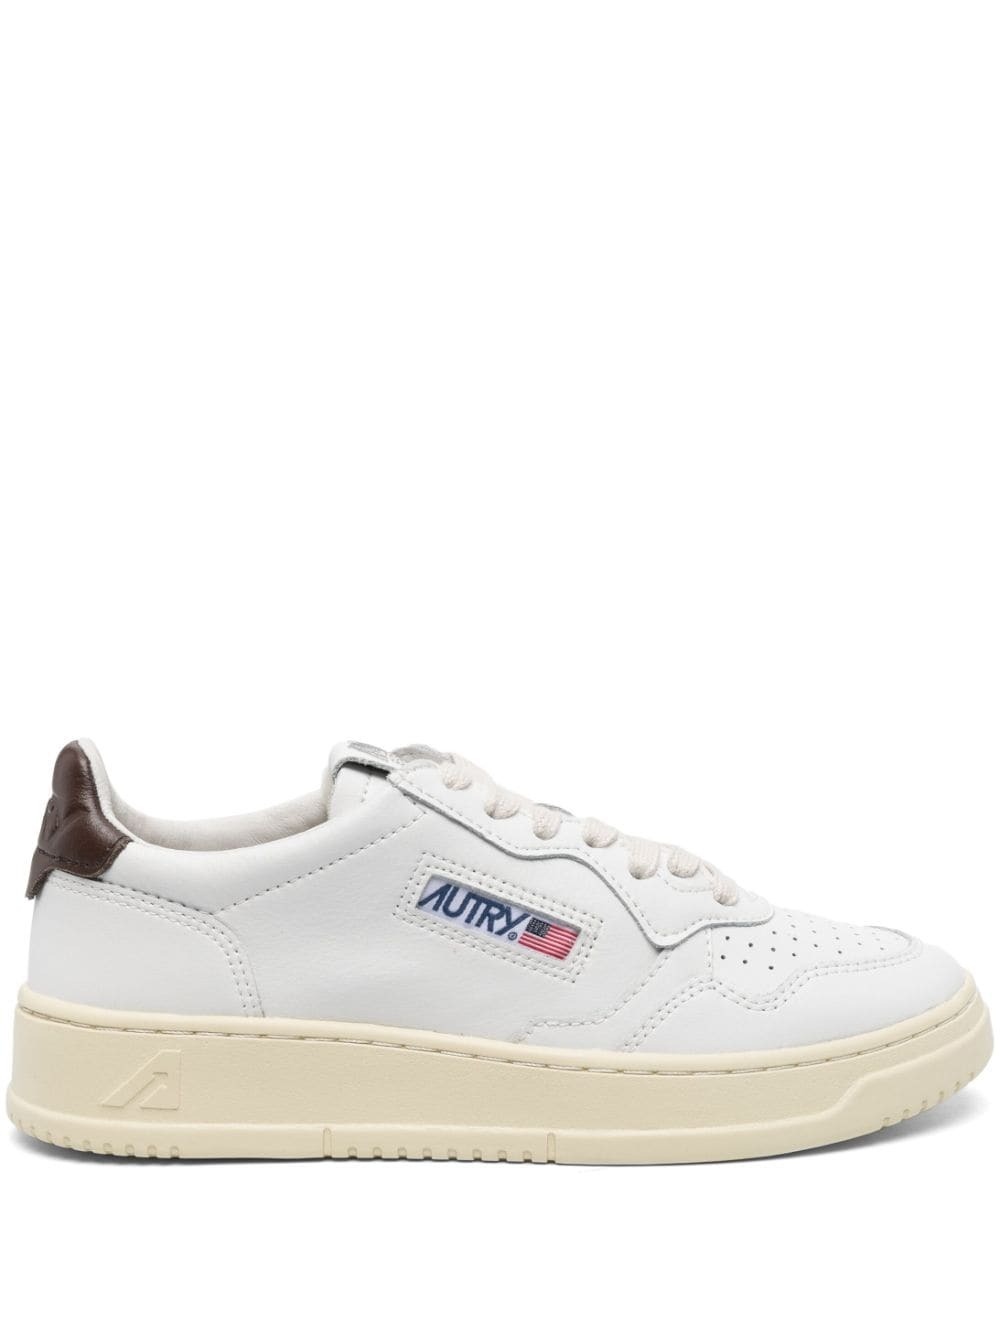 AUTRY - Medialist Low Leather Sneakers Autry